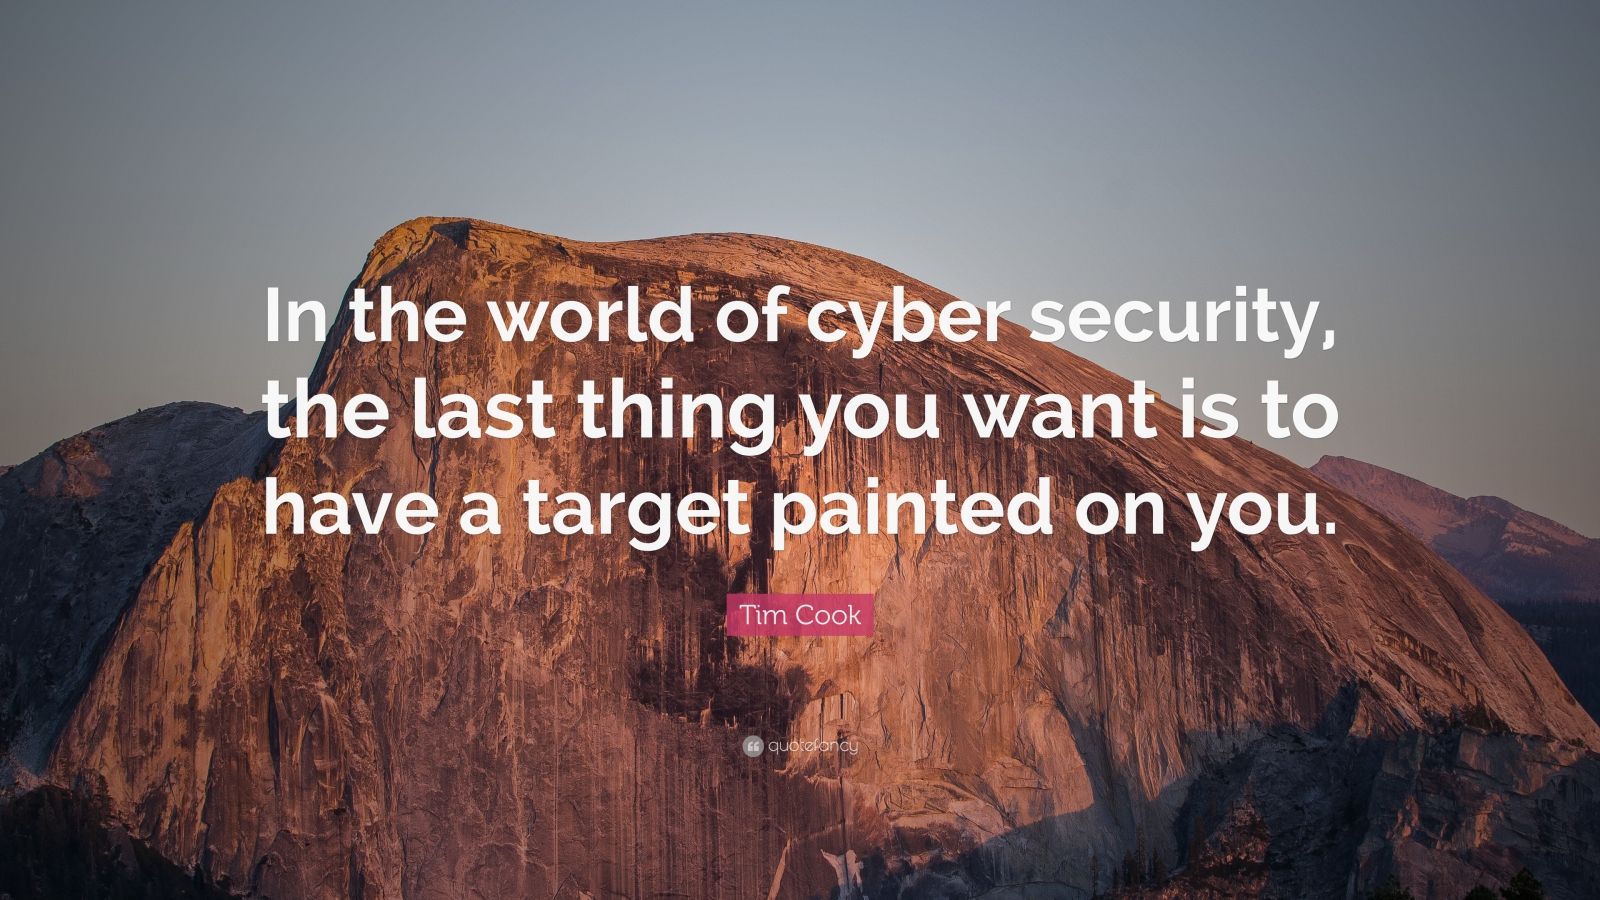 Cyber Security Quotes For Essay Mbelgedes